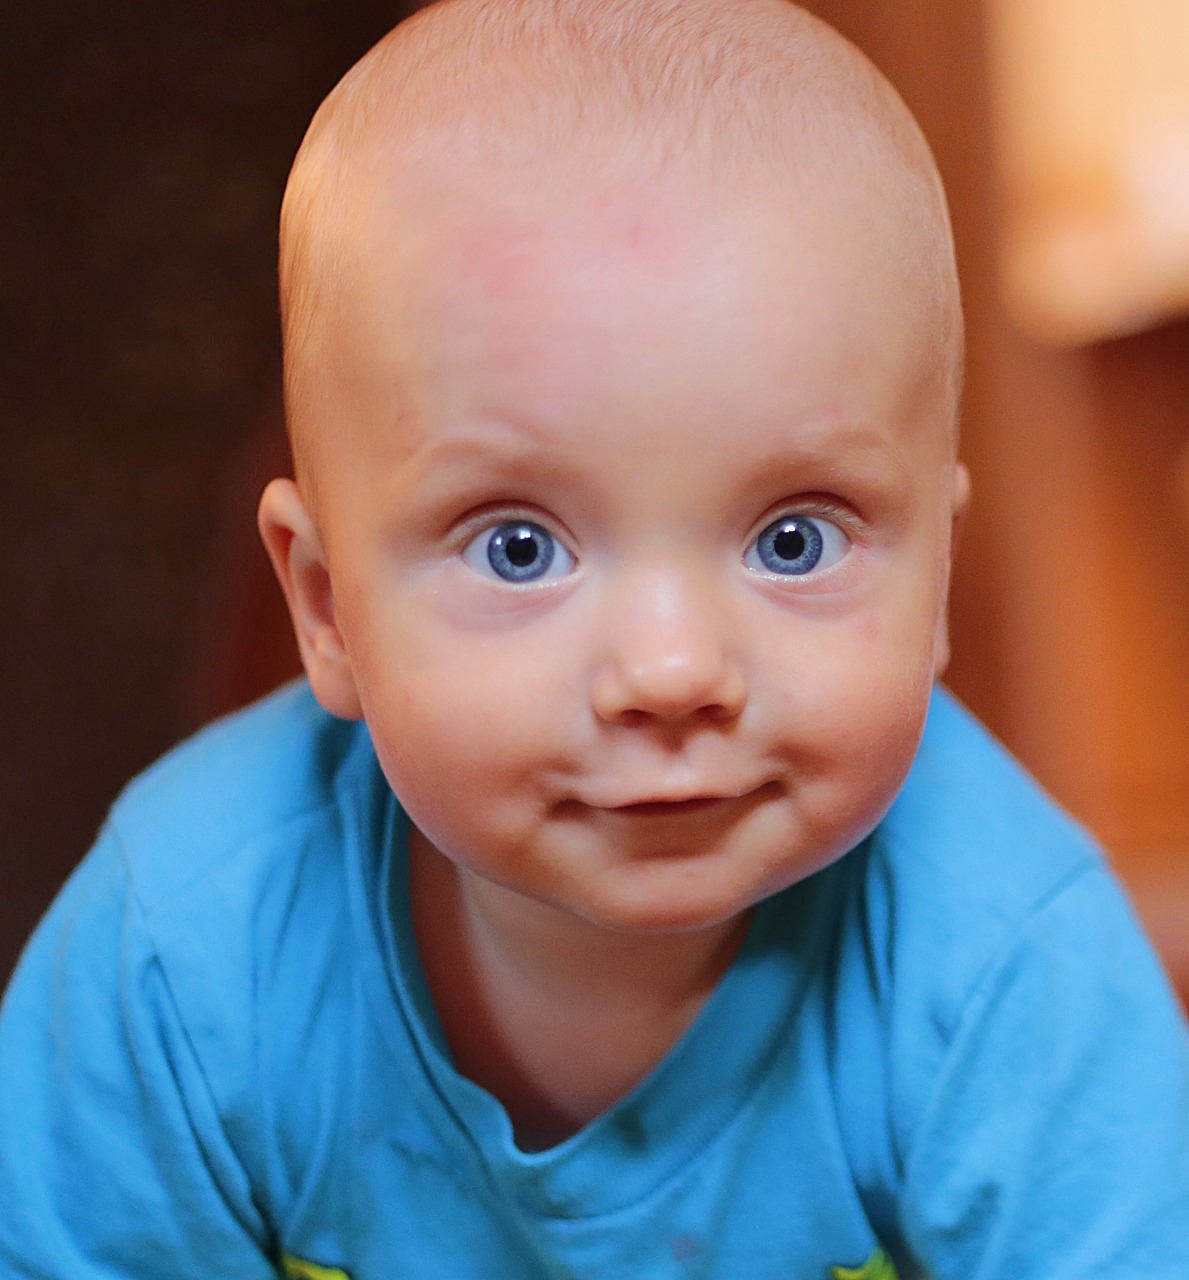 a close up of a baby wearing a blue shirt, a portrait, by Aleksander Gierymski, pexels, cute face big eyes and smiley, innocent look. rich vivid colors, ultrarealistic uhd faces, video